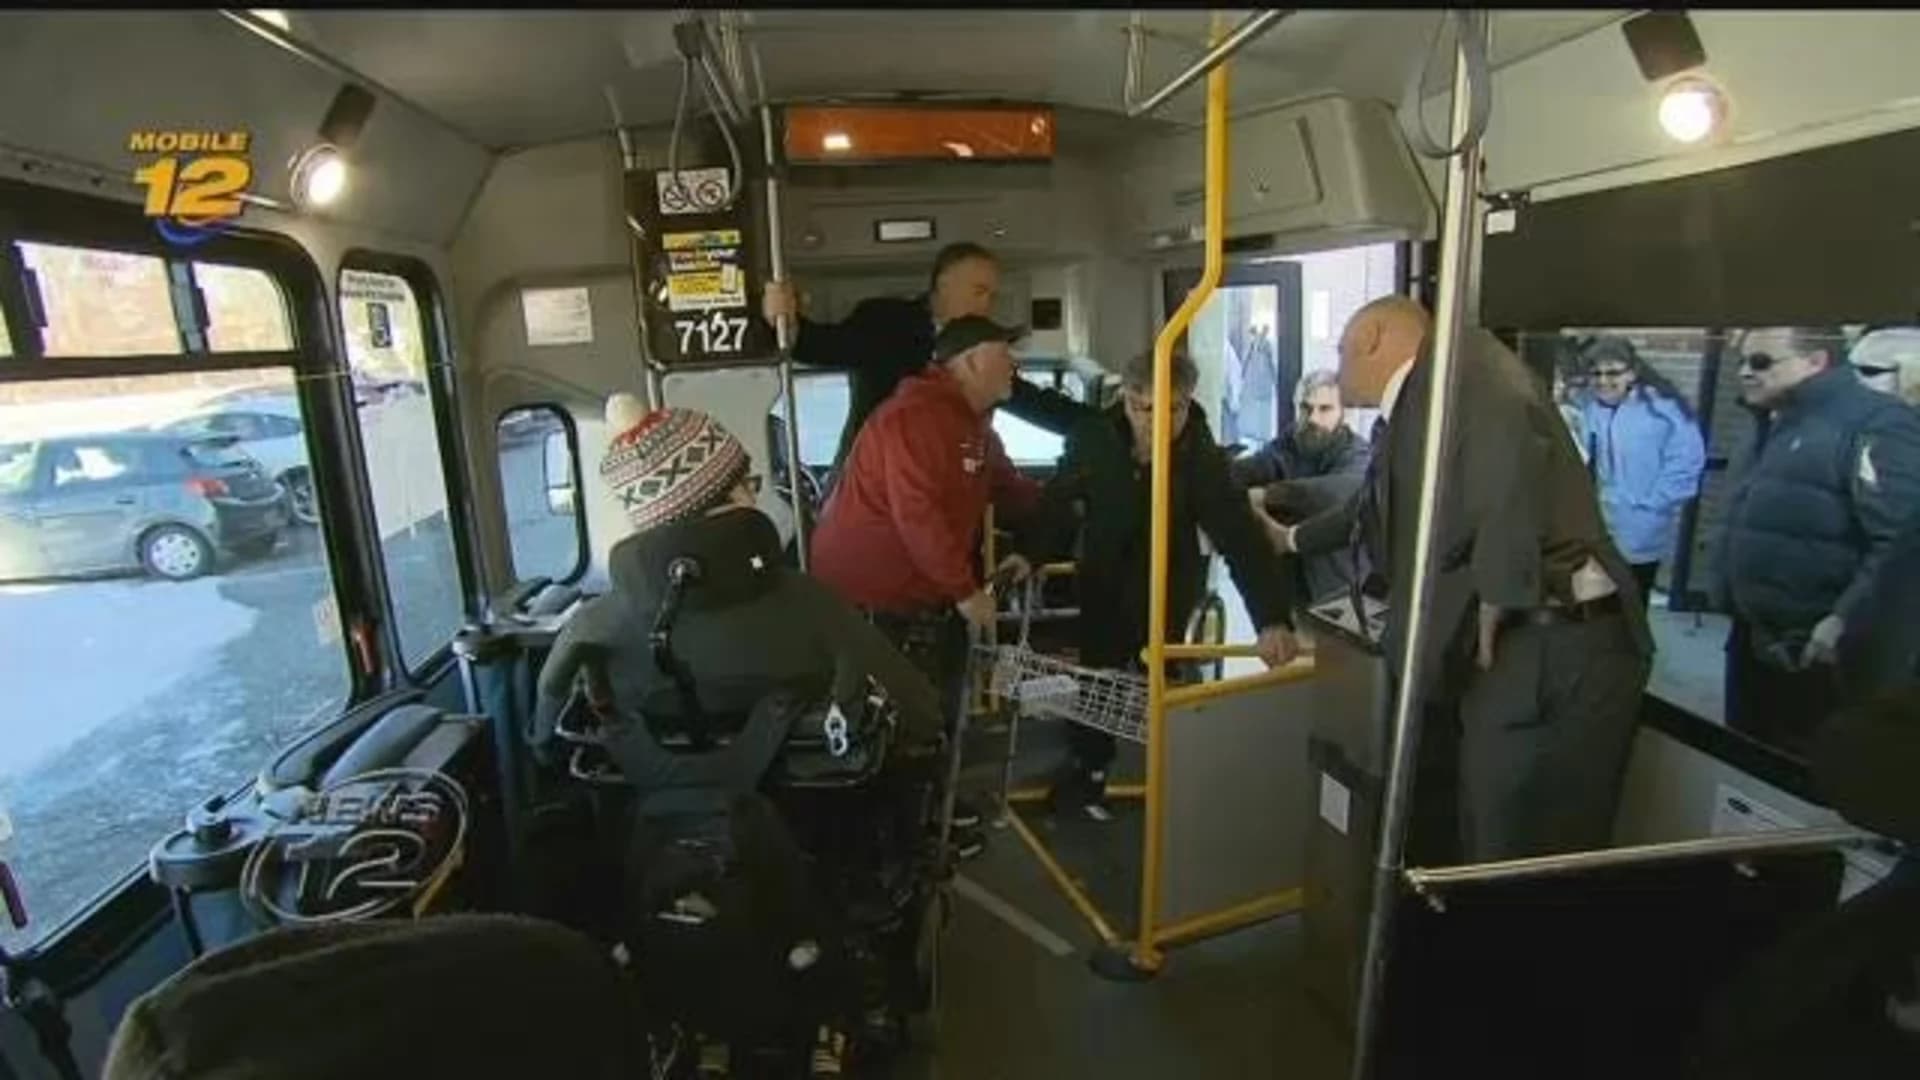 New Suffolk buses irk disabled riders over accessibility, space